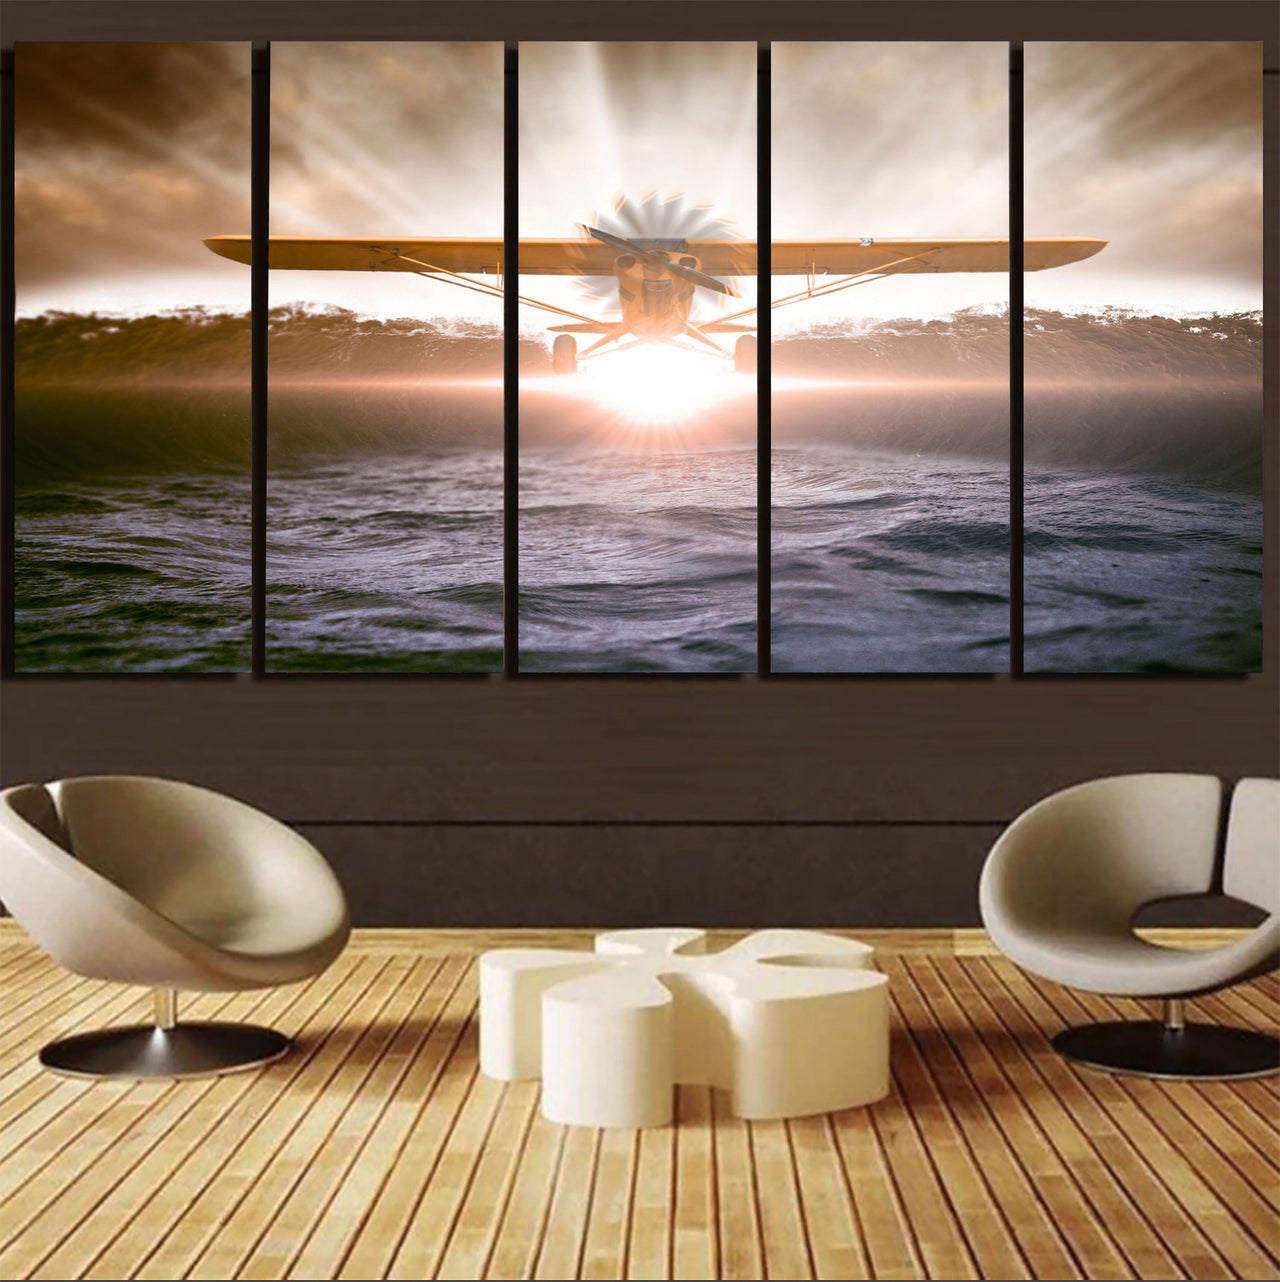 Graphical Propeller Printed Canvas Prints (5 Pieces) Aviation Shop 